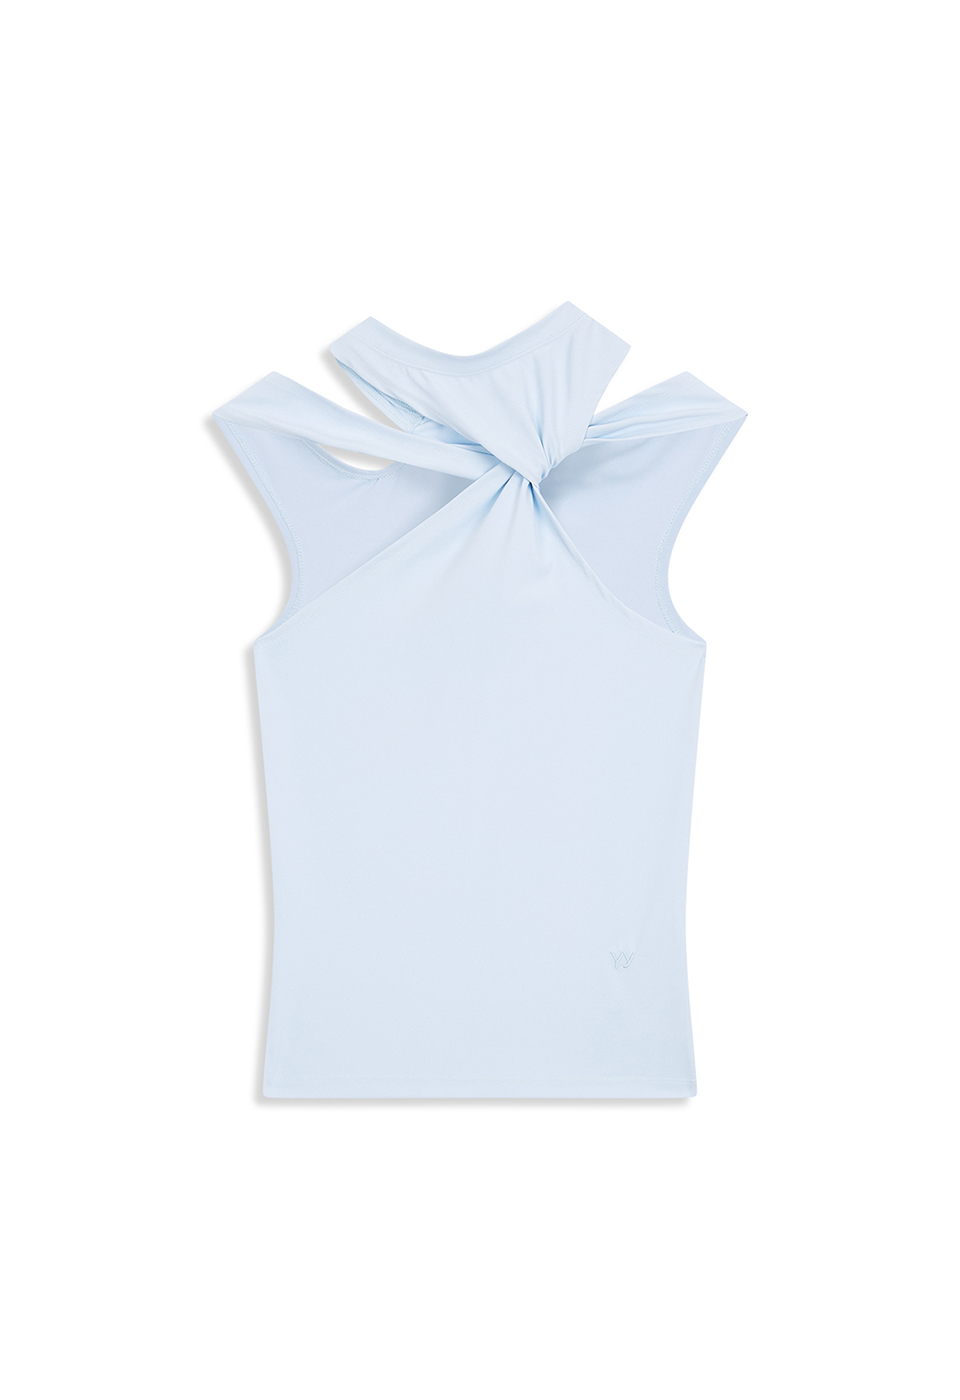 TWISTED CUT-OUT TOP, SKY BLUE